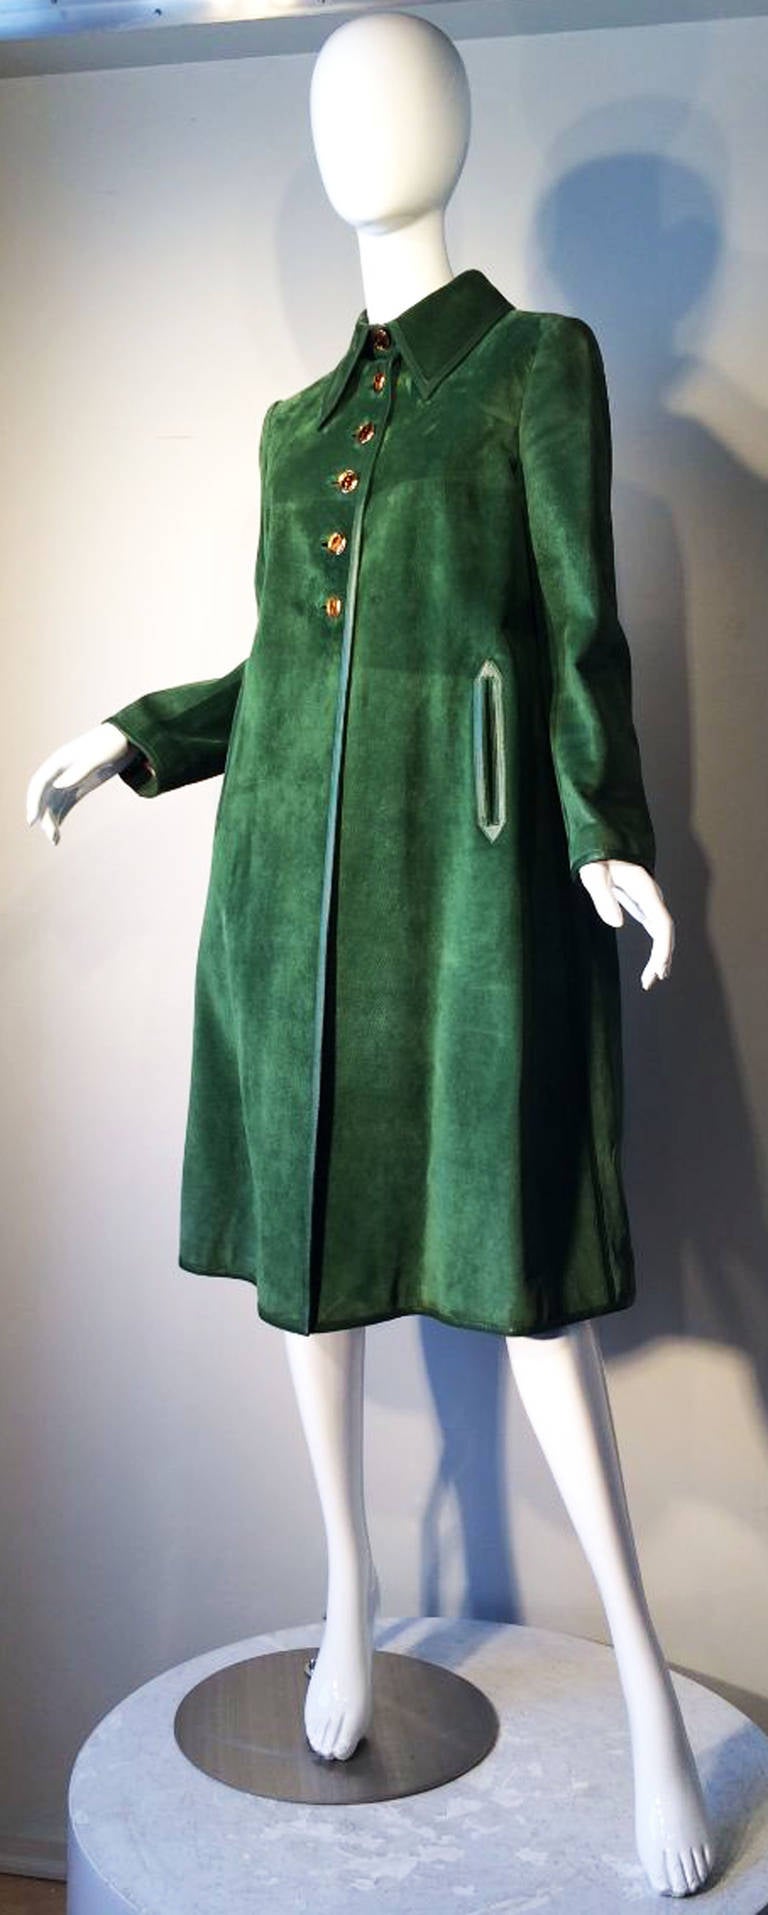 A fine and rare vintage Gucci suede leather swing coat. Vivid jade green suede item trimmed in matching green calf leather. Item fully silk lined and features inset pockets with a full swing hemline and iconic gilt and enamel logo buttons front.